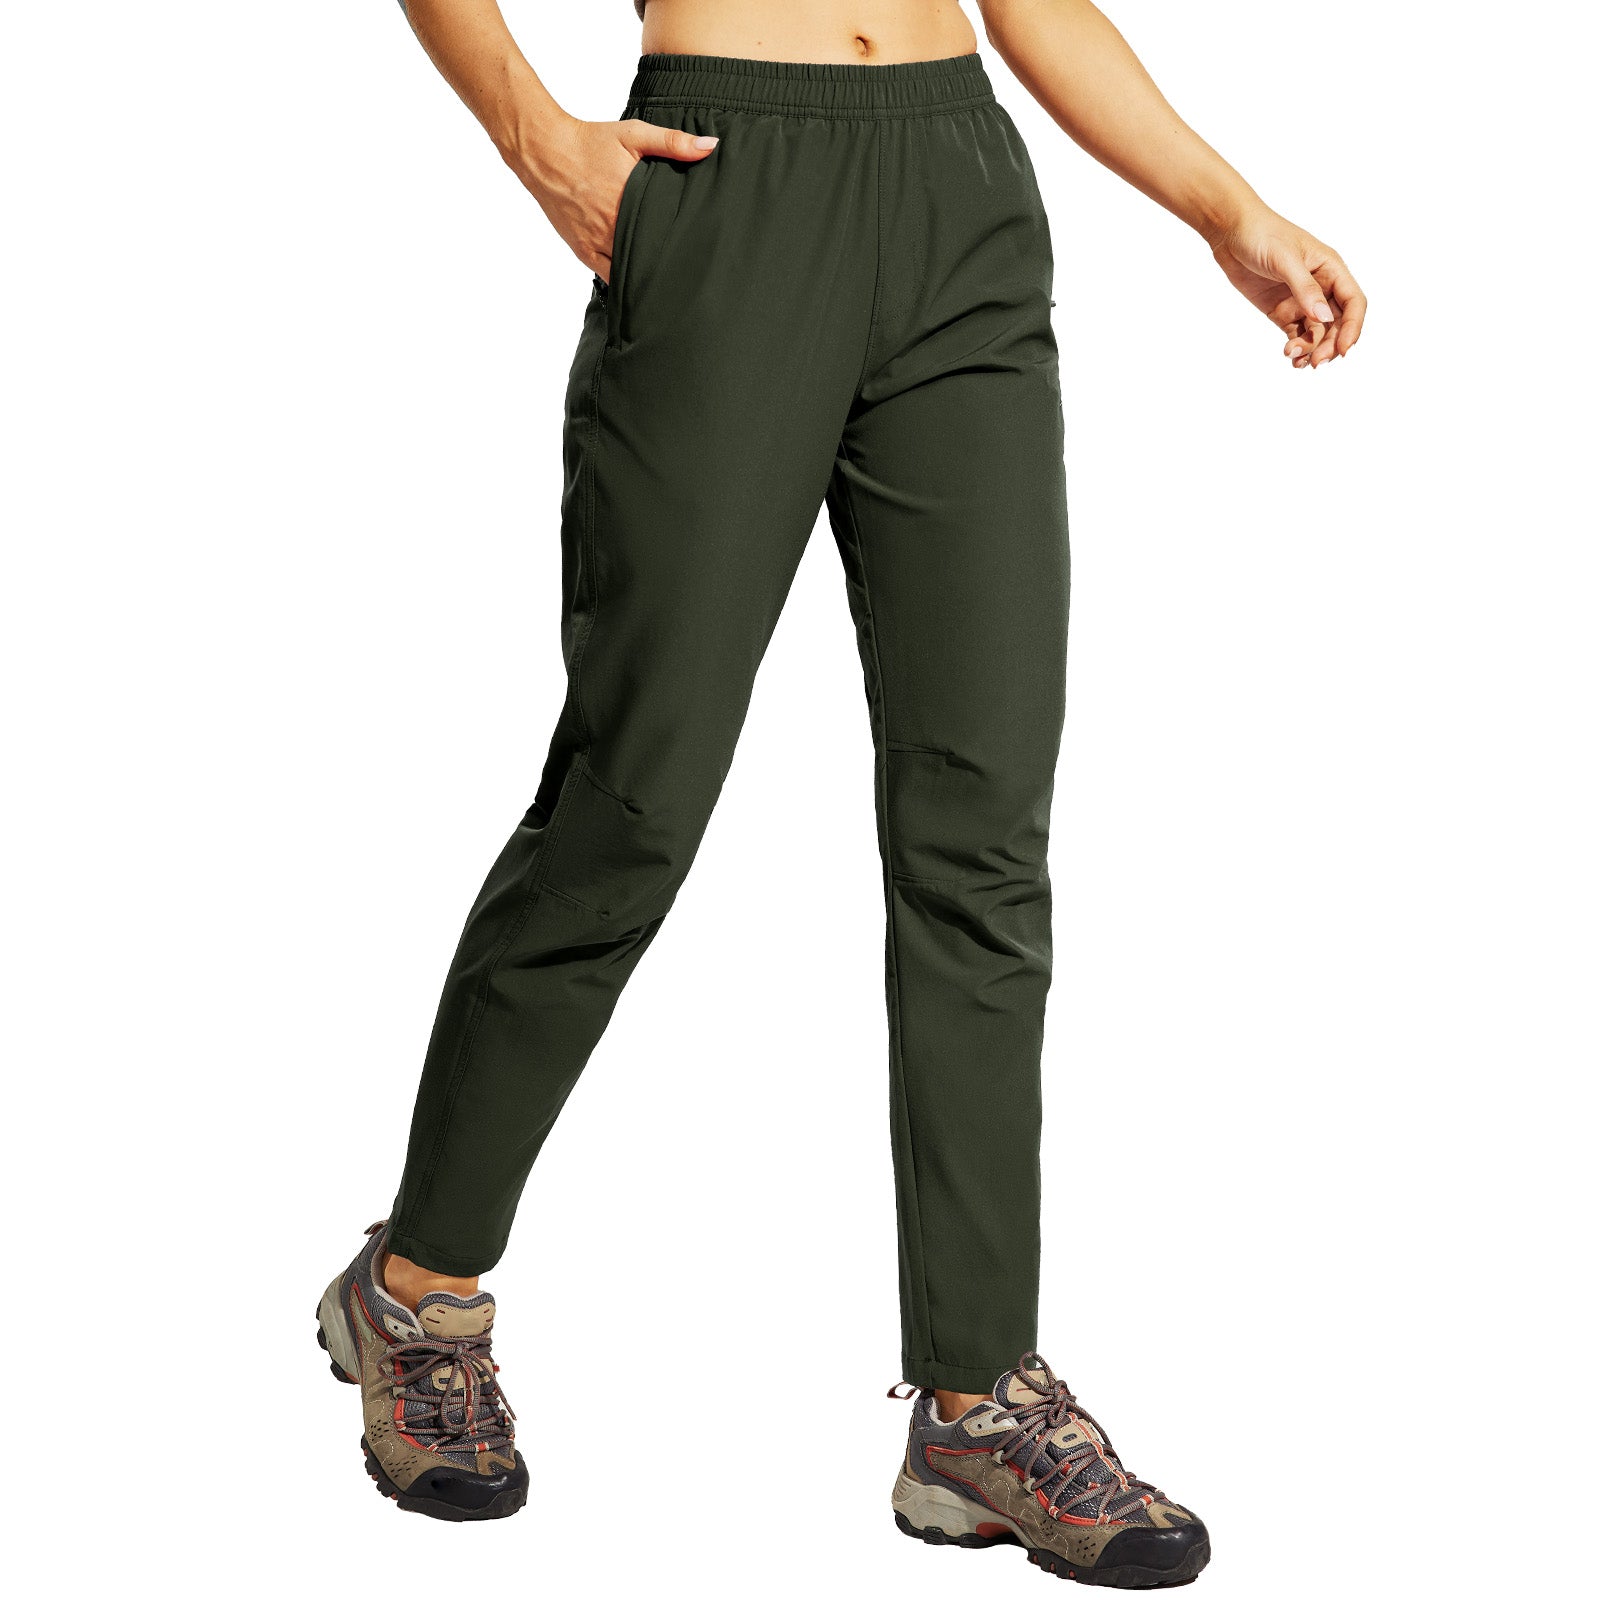 Womens Cargo Joggers Hiking Pants Lightweight Quick Dry Water Resistant  Womens Pants with Zipper Pockets